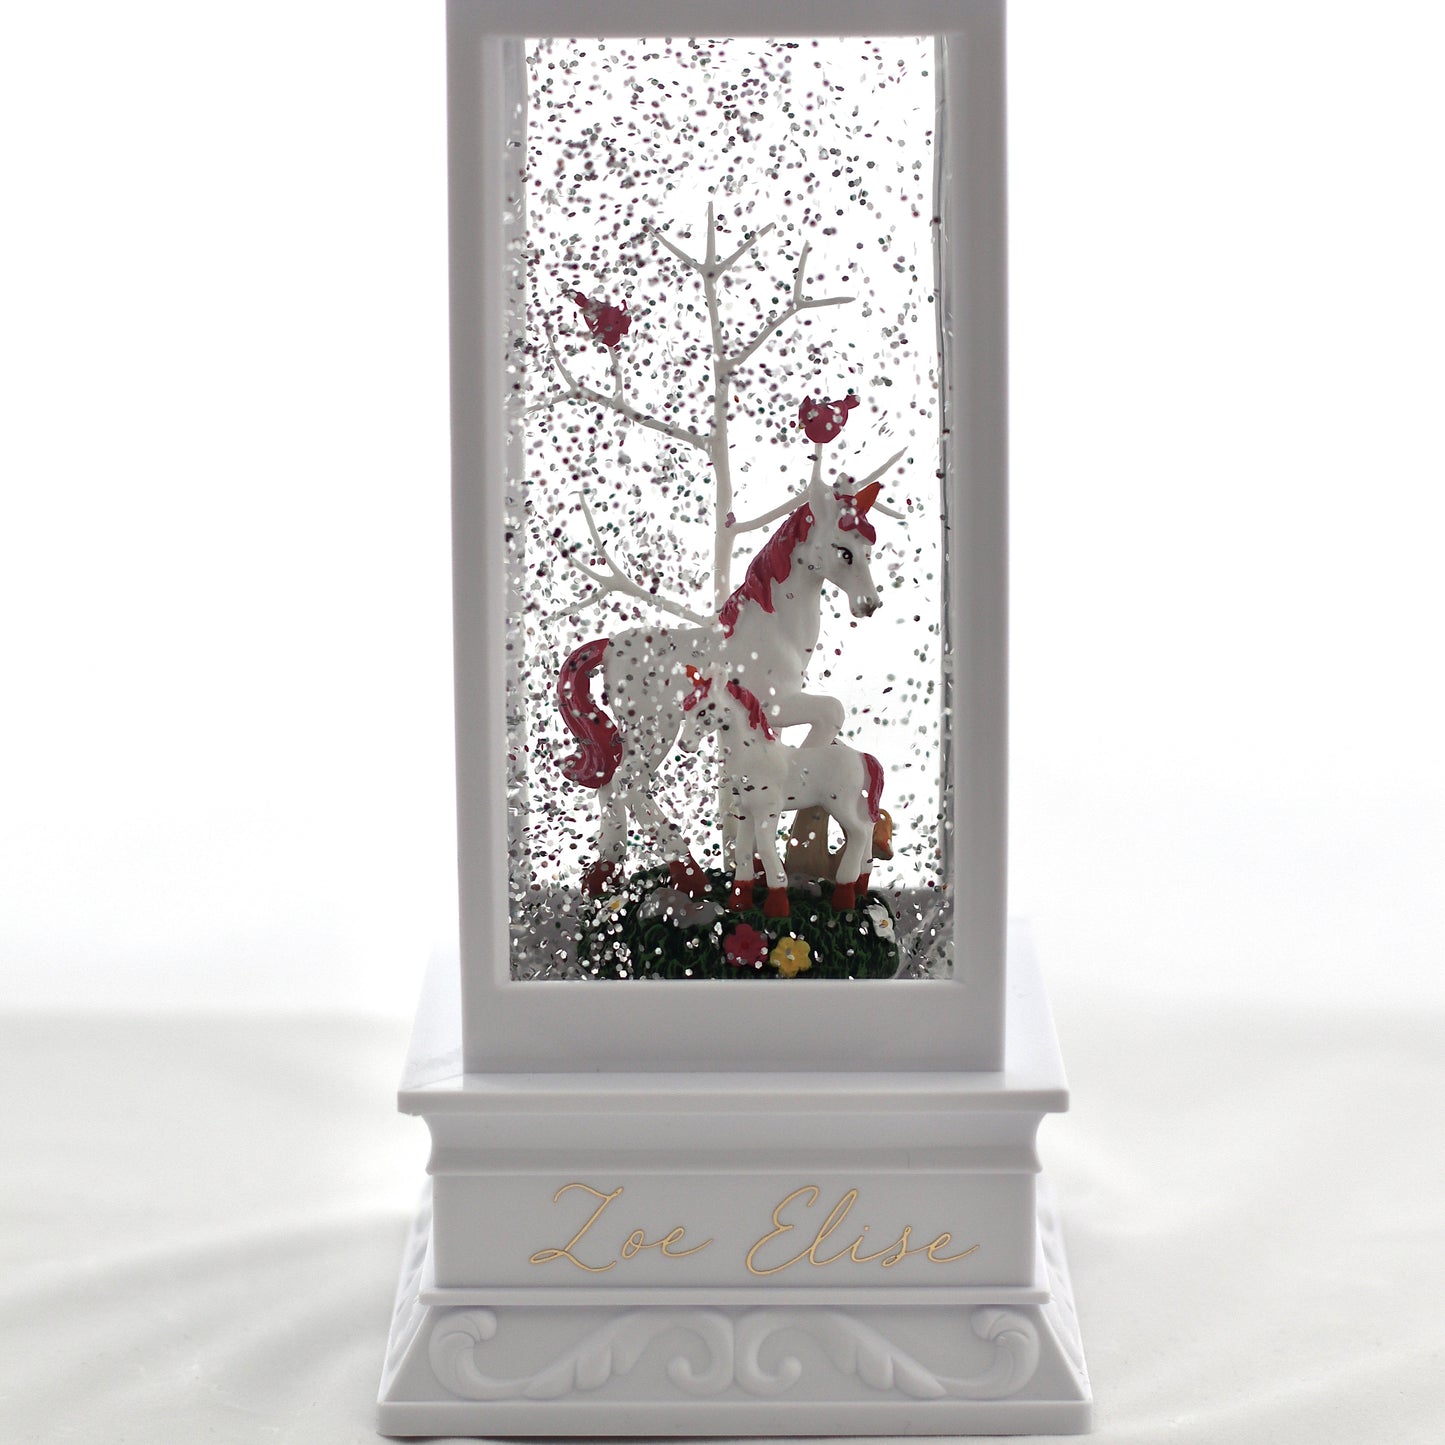 Our Night light Lantern is a beautiful collectable lantern that lights up, with the figurine surrounded by glitter floating glitter while on.